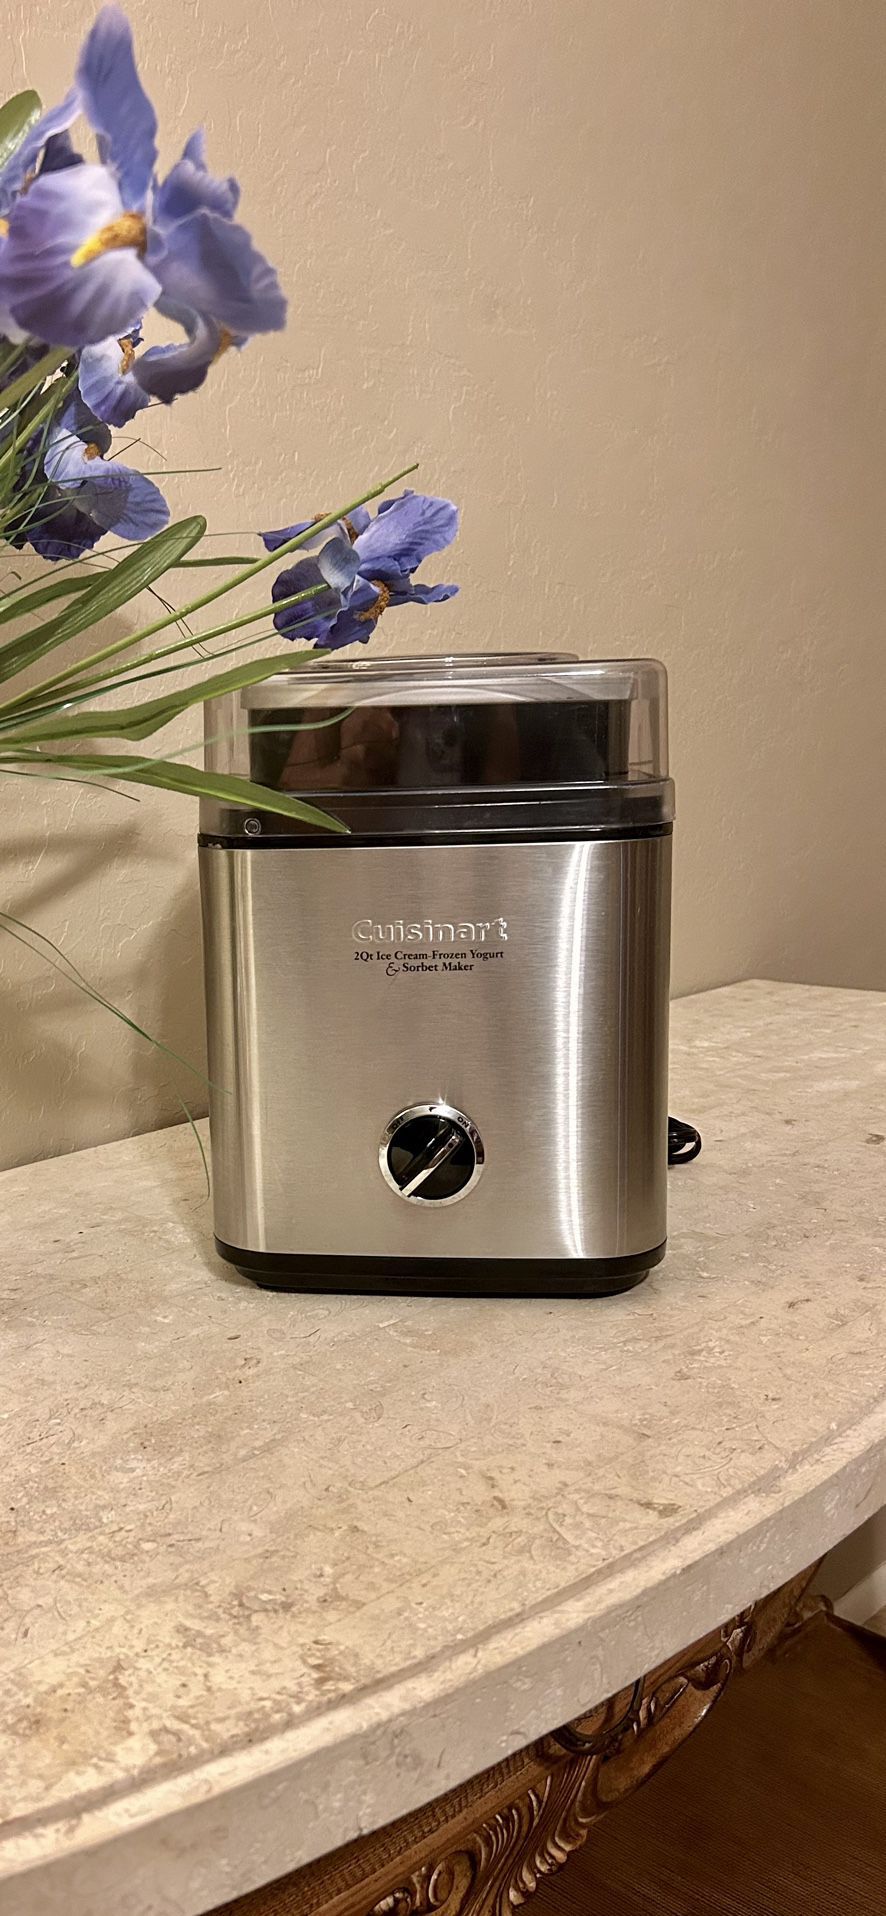 Well Cared For Cuisinart Ice Cream, Yogurt, Sorbet Maker Under 30 Minutes! Our Items Are Always Clean & Sanitized! Manual & Recipes. (Shea & 32nd St)